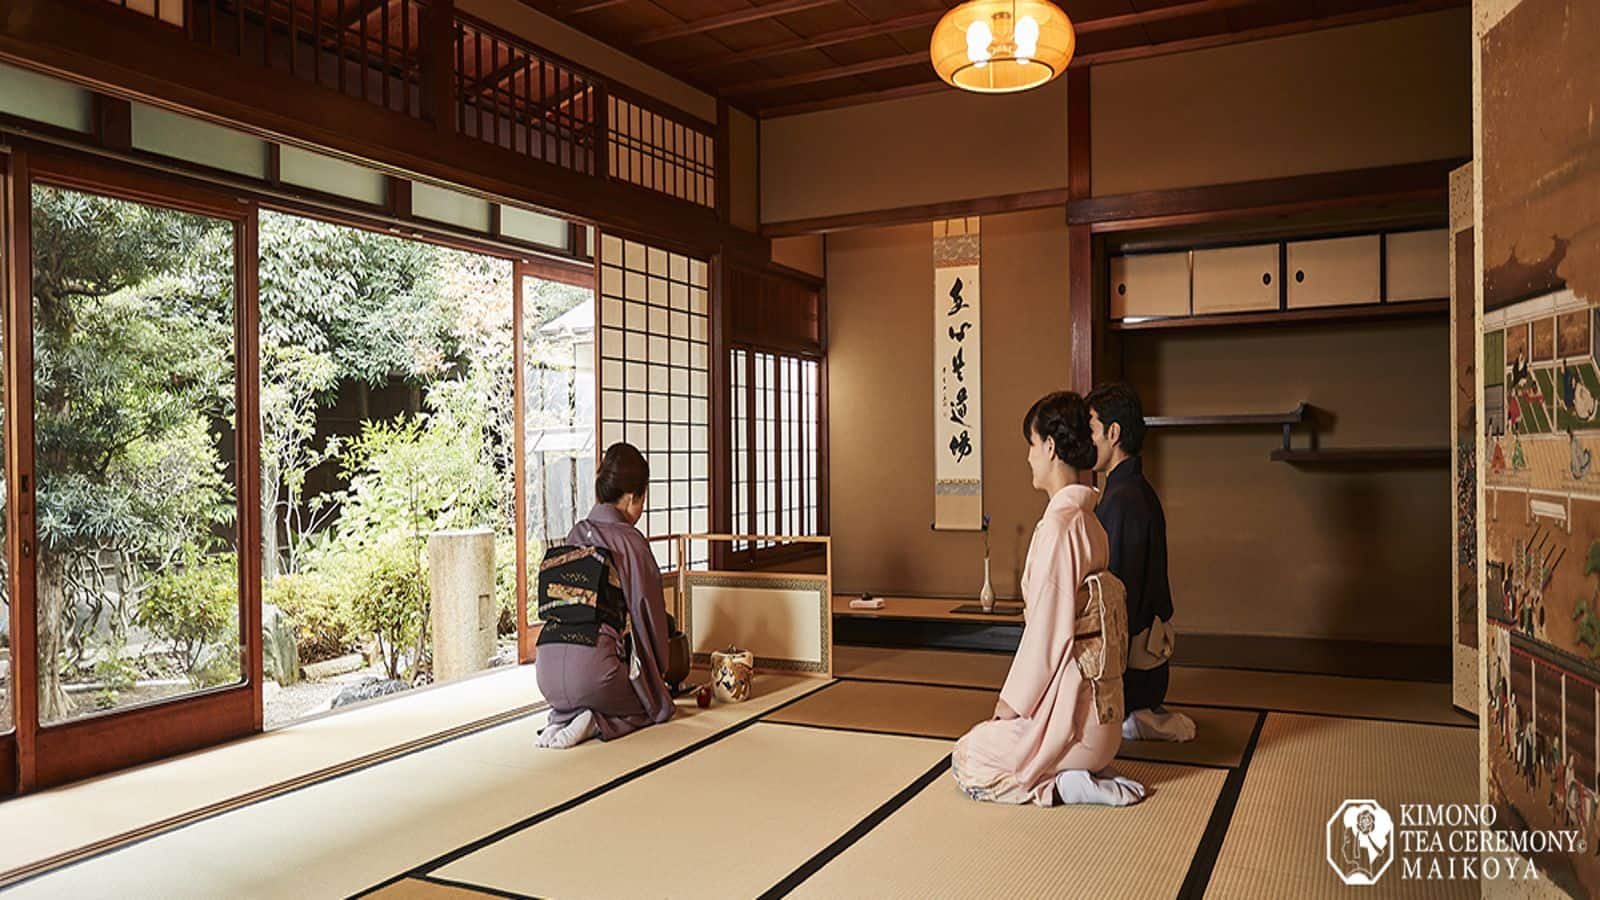 Delve into Japan's kimono culture with this guide